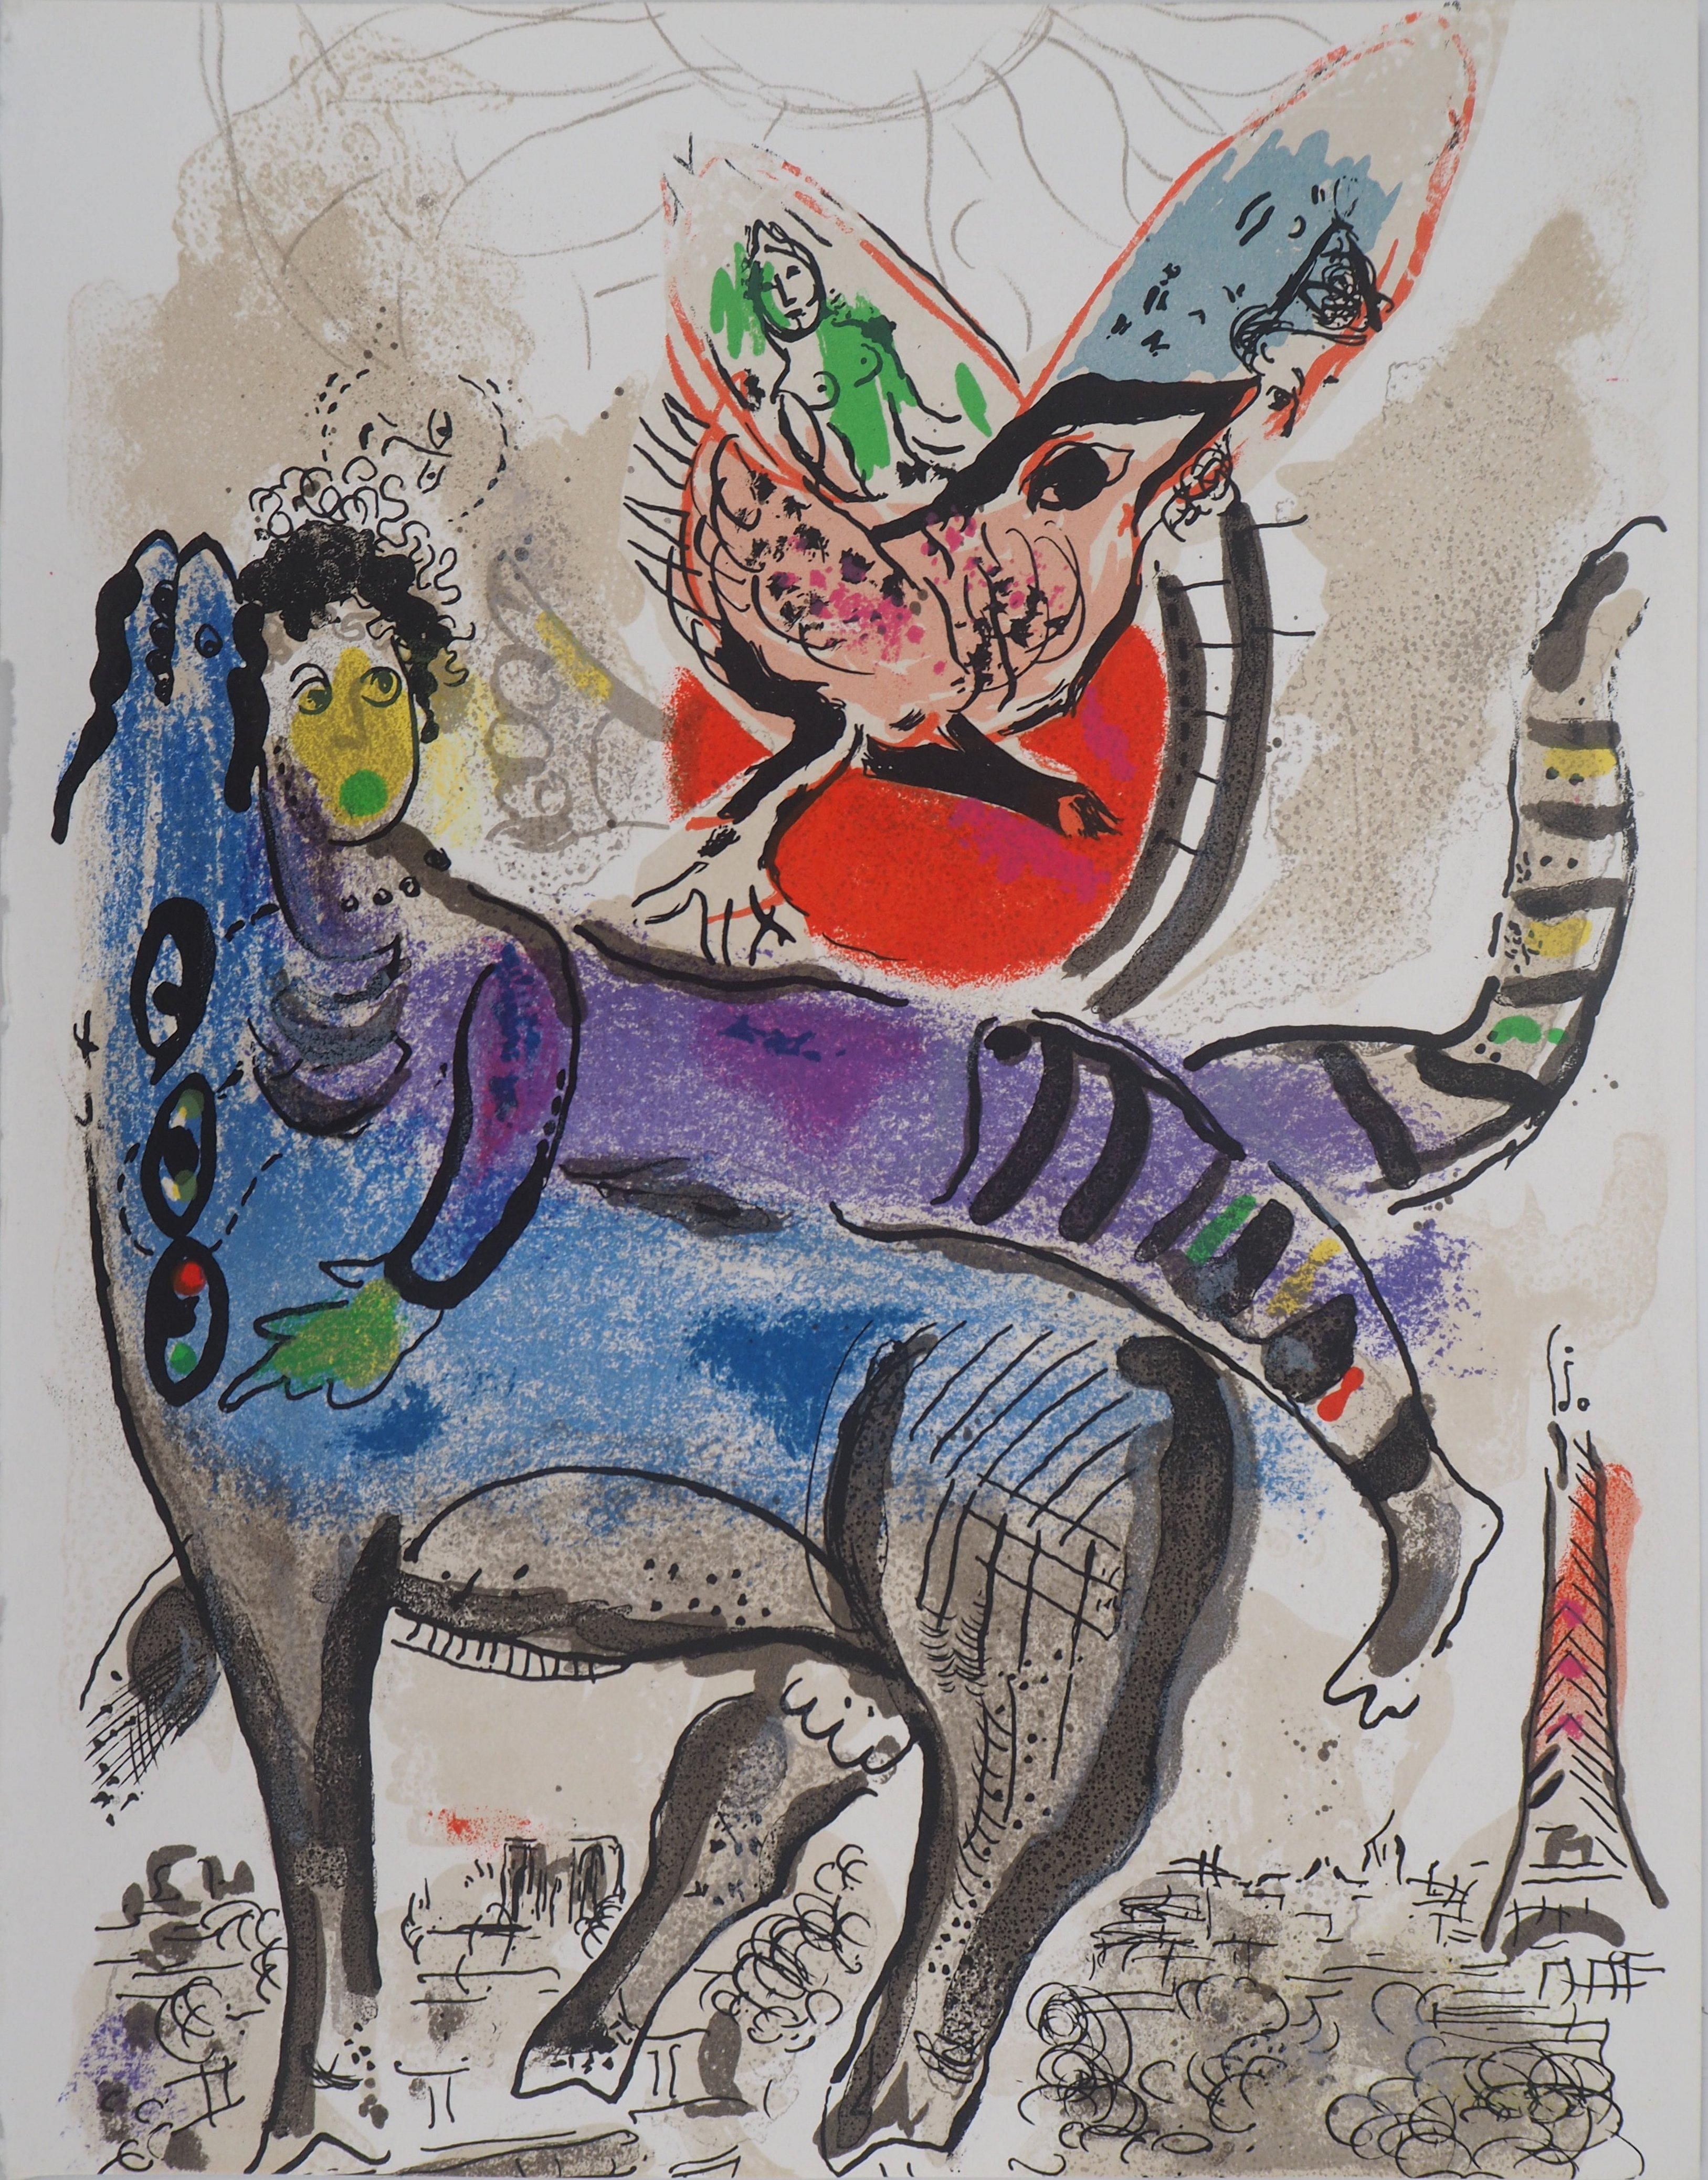 Did Marc Chagall work in the Expressionist style?